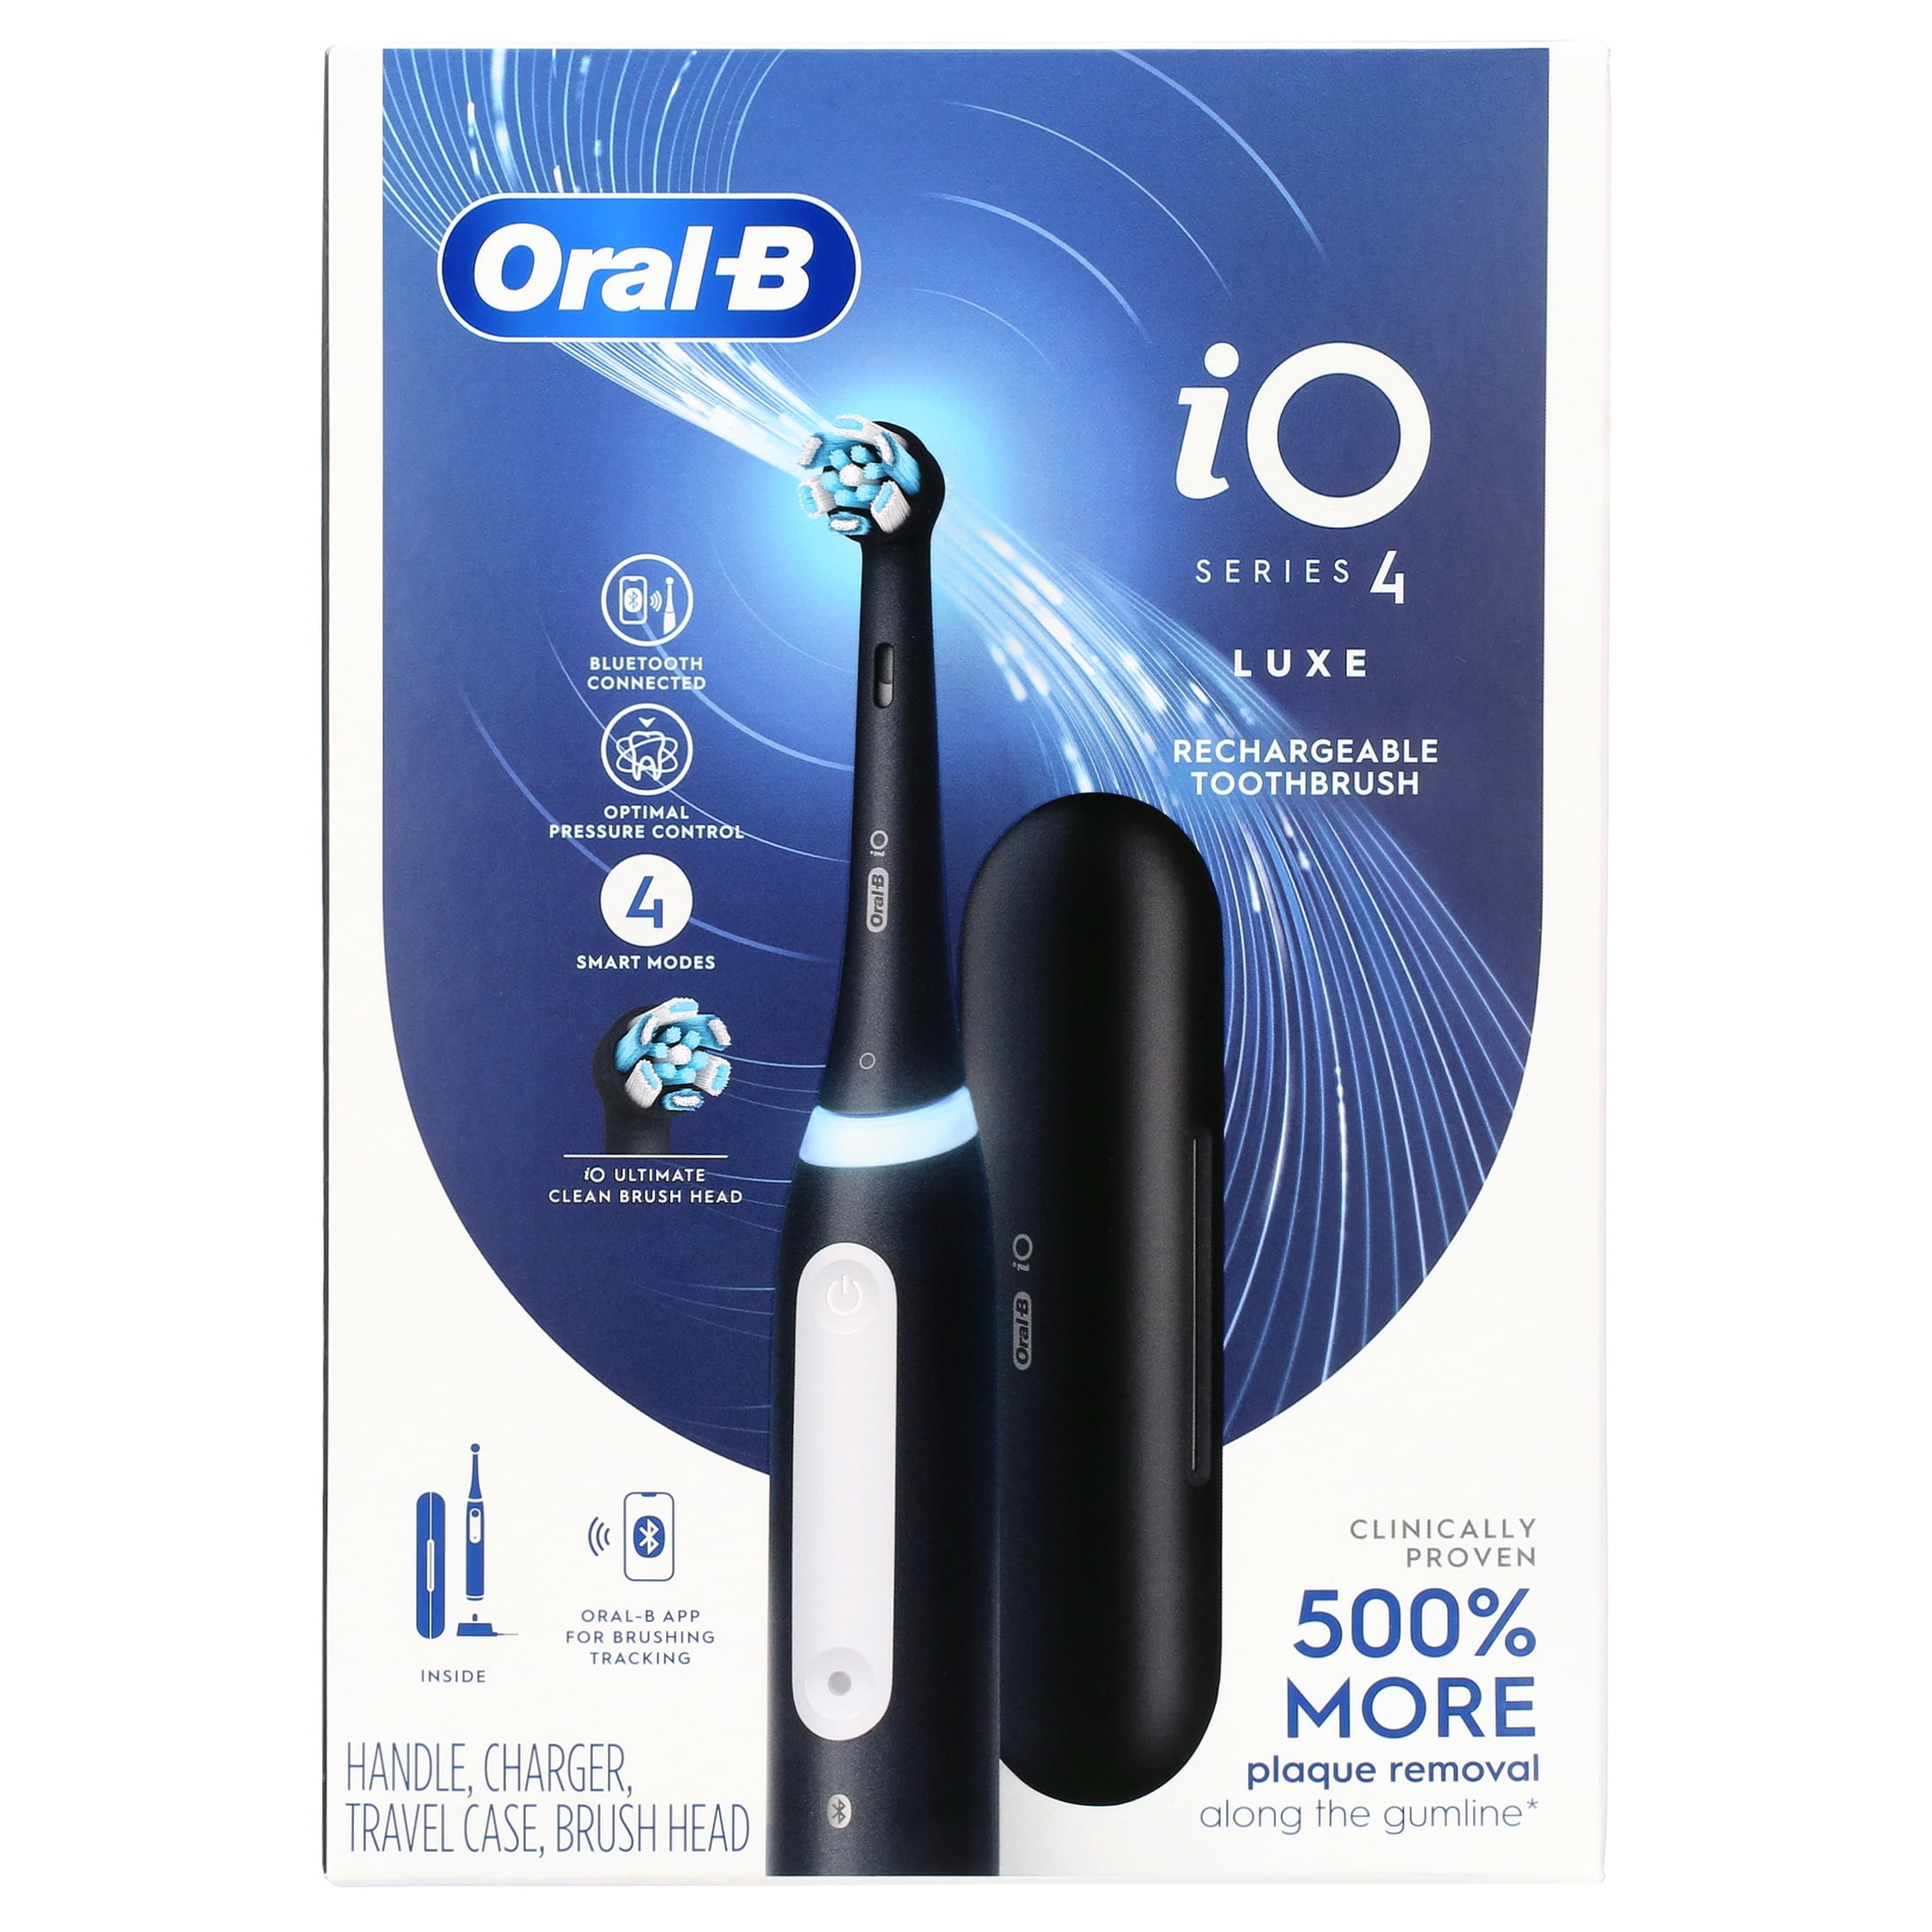 Oral-B Brush 4 with (1) iO Black Electric Toothbrush Head, Series Rechargeable,